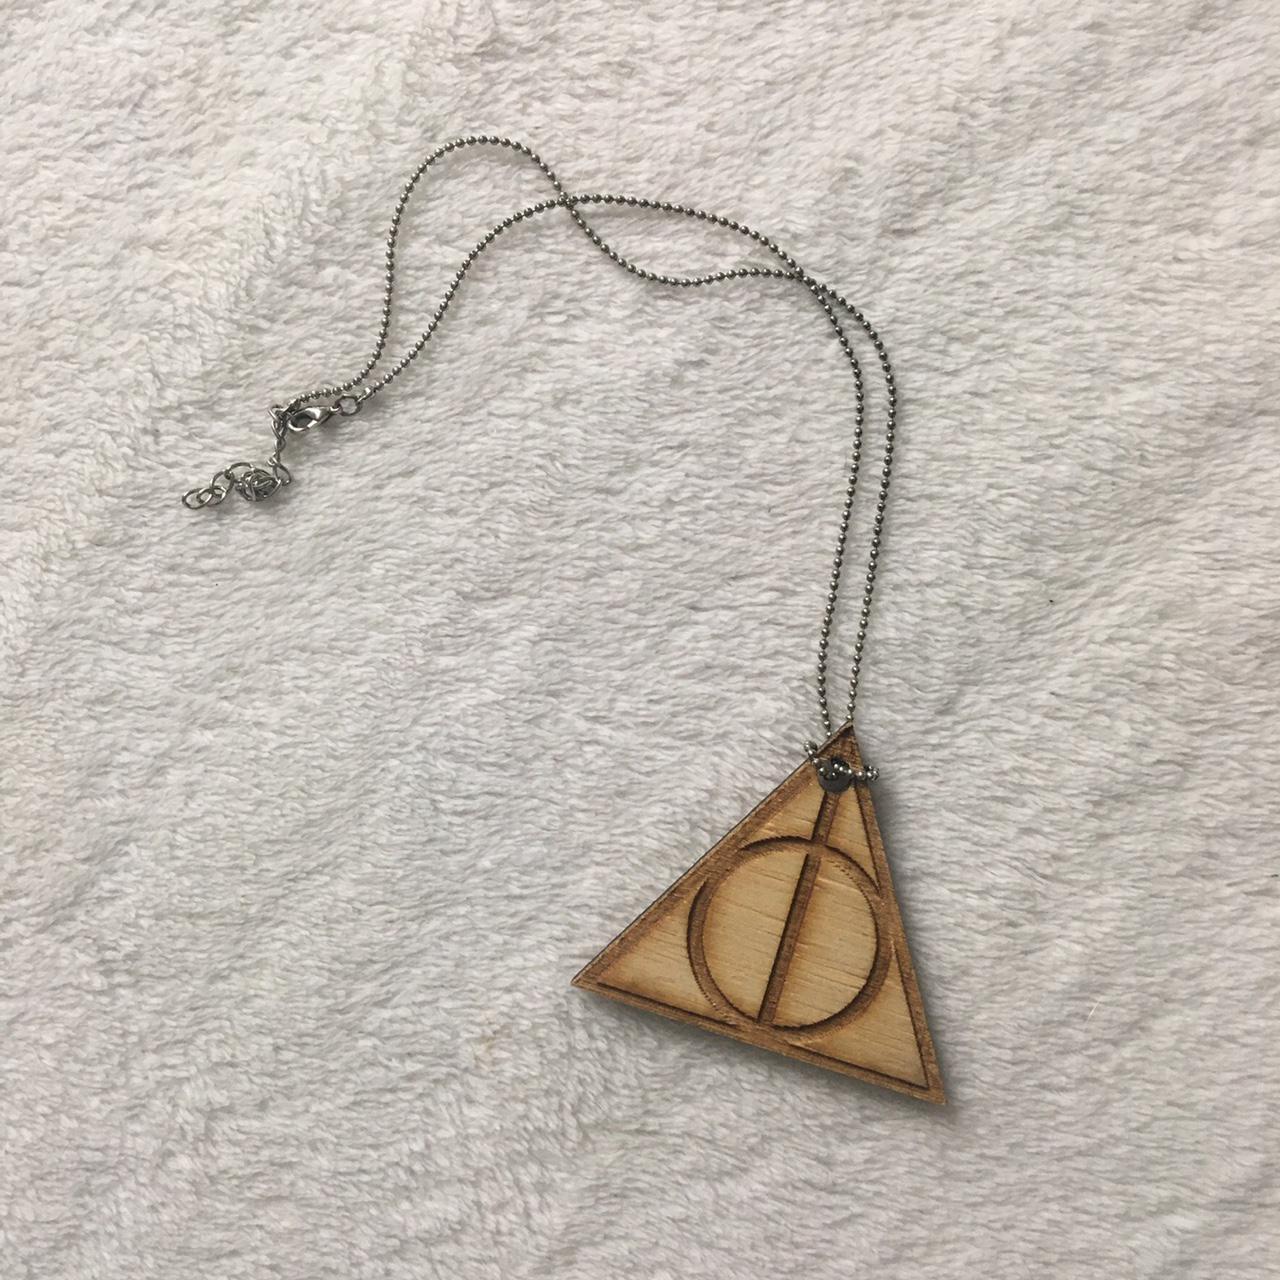 Wholesale Men'S Harry Potter And The Deathly Hallows Necklace